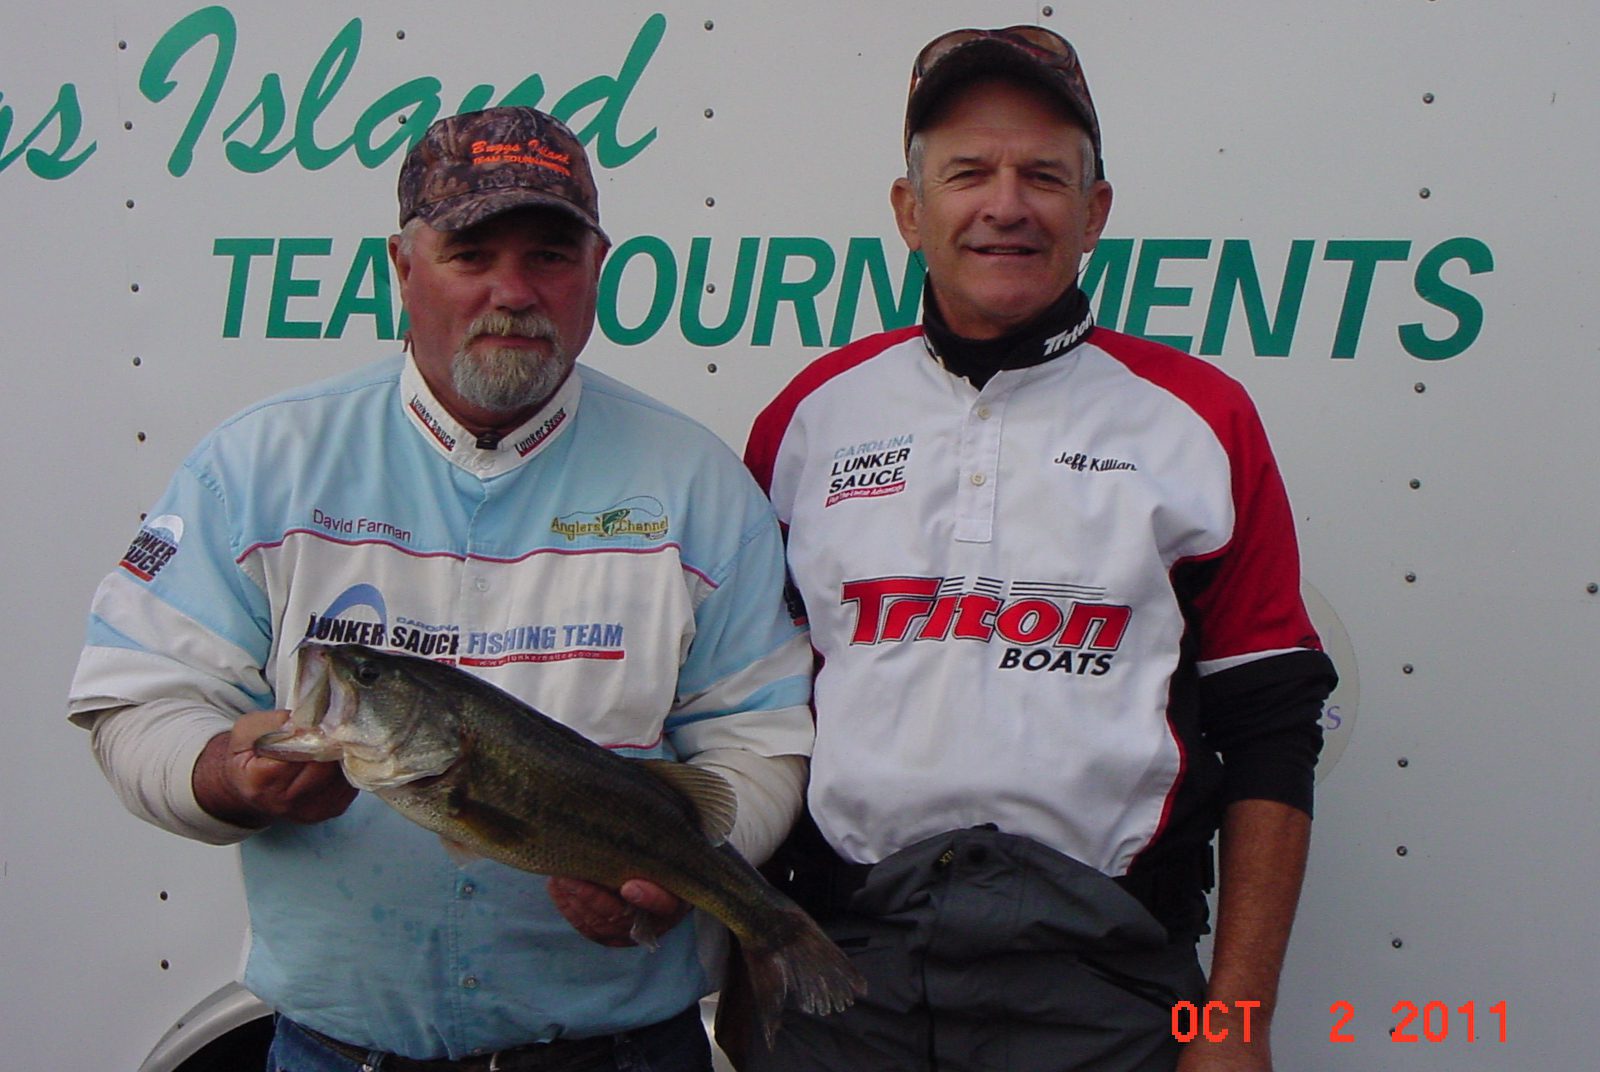 Buggs Island Team Tournaments / Shoot-Out Championship Results